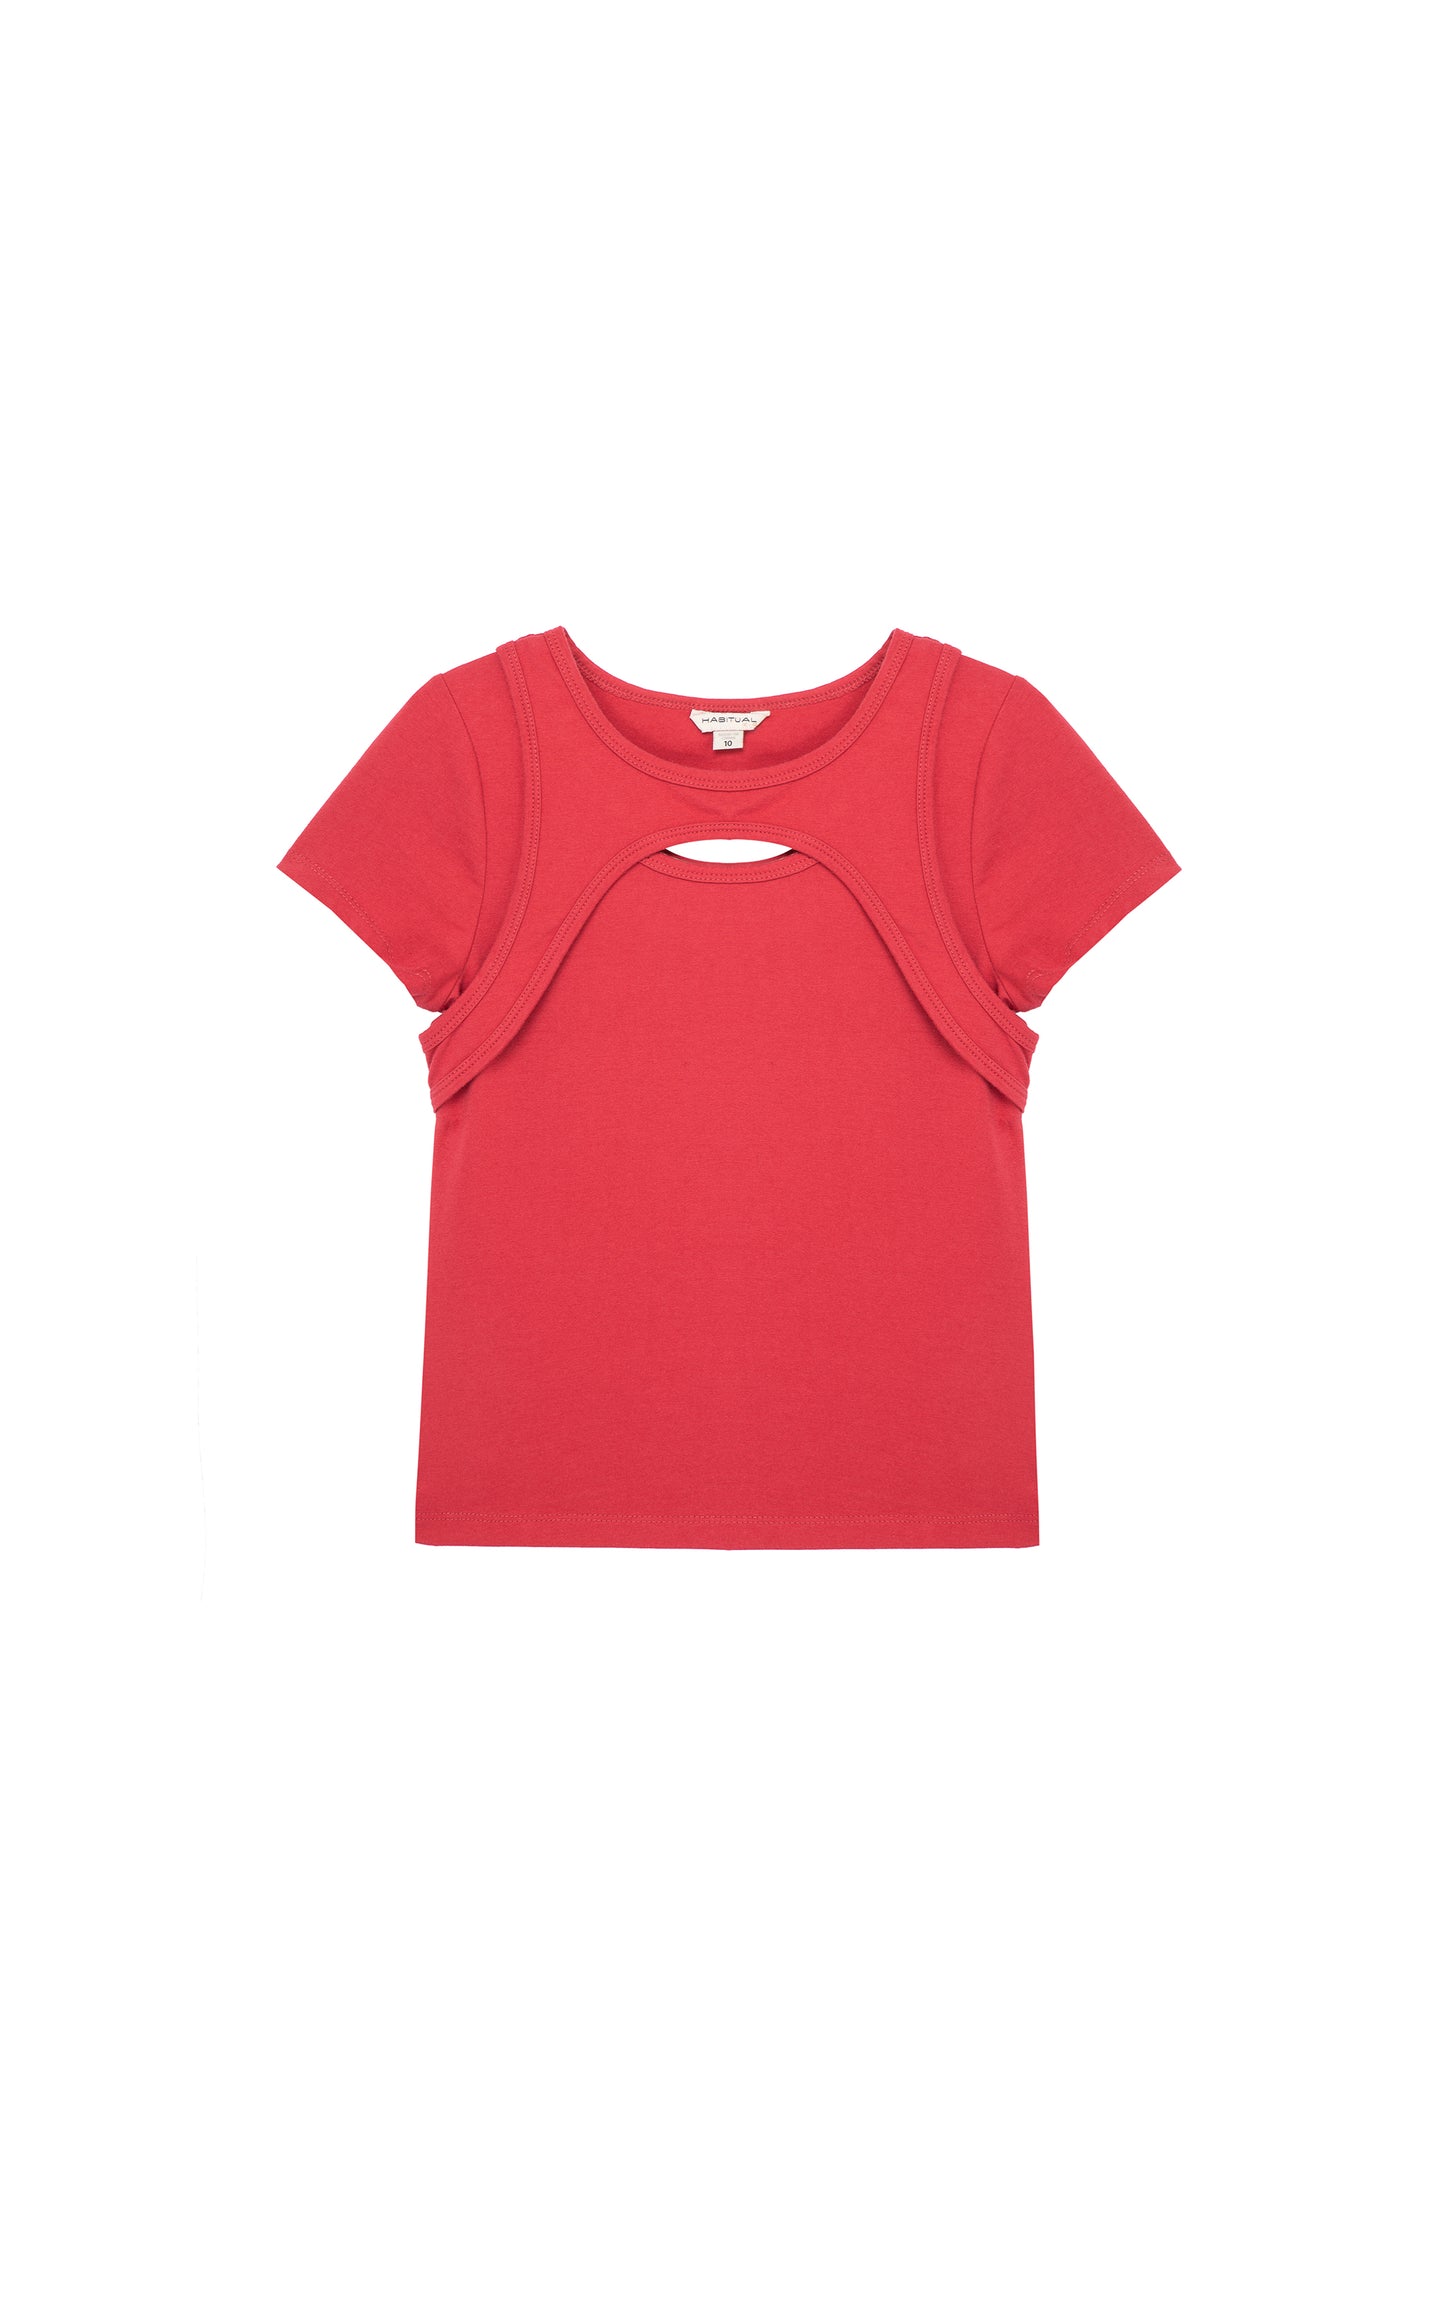 DARK RED SHORT SLEEVE TOP WITH A SMALL KEYHOLE CUT-OUT AT THE UPPER BODICE